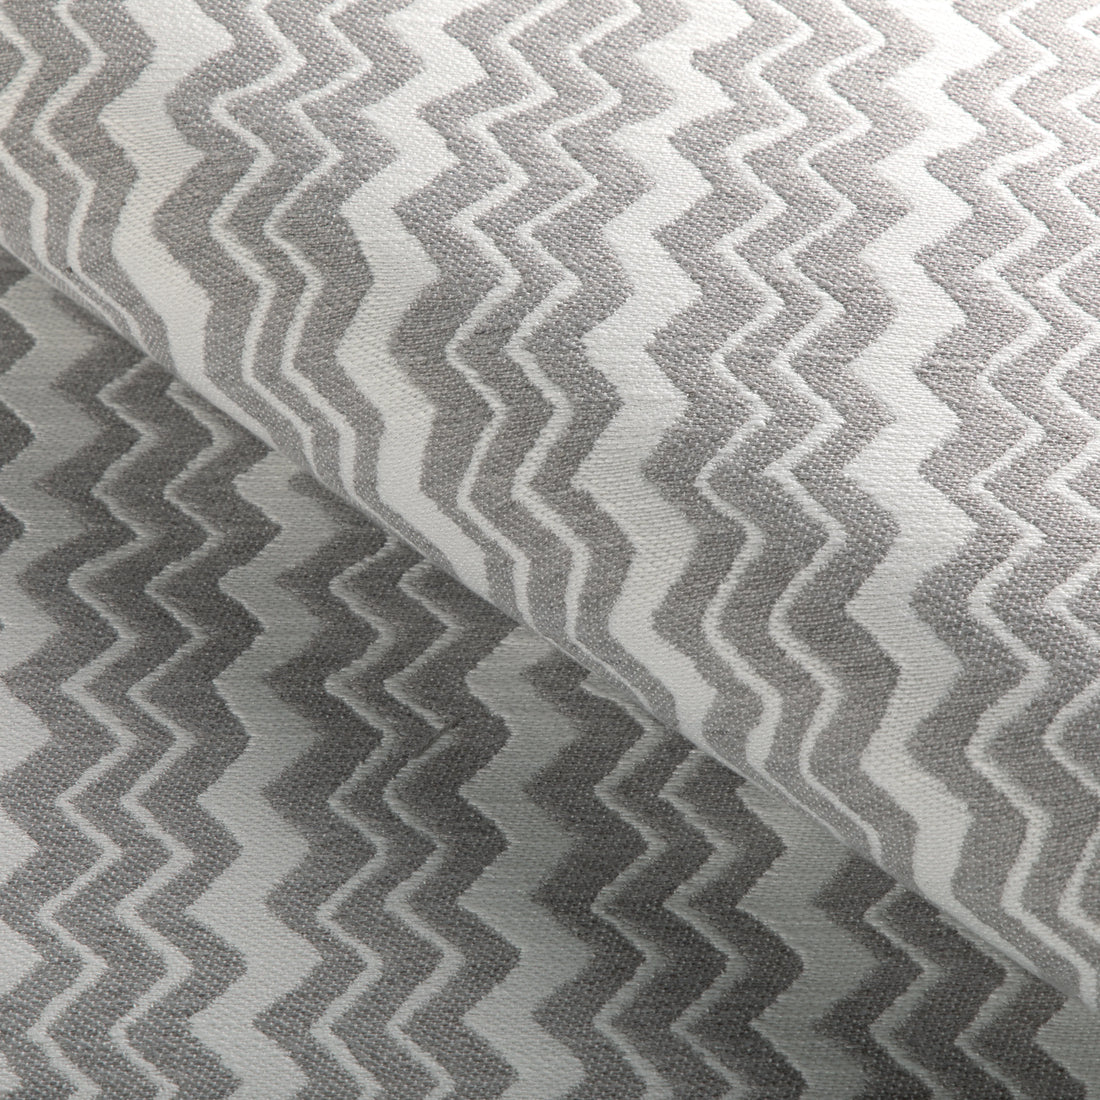 Fabric sample of Matipi fabric in driftwood color - pattern 36925.11.0 - by Kravet Couture in the Riviera collection